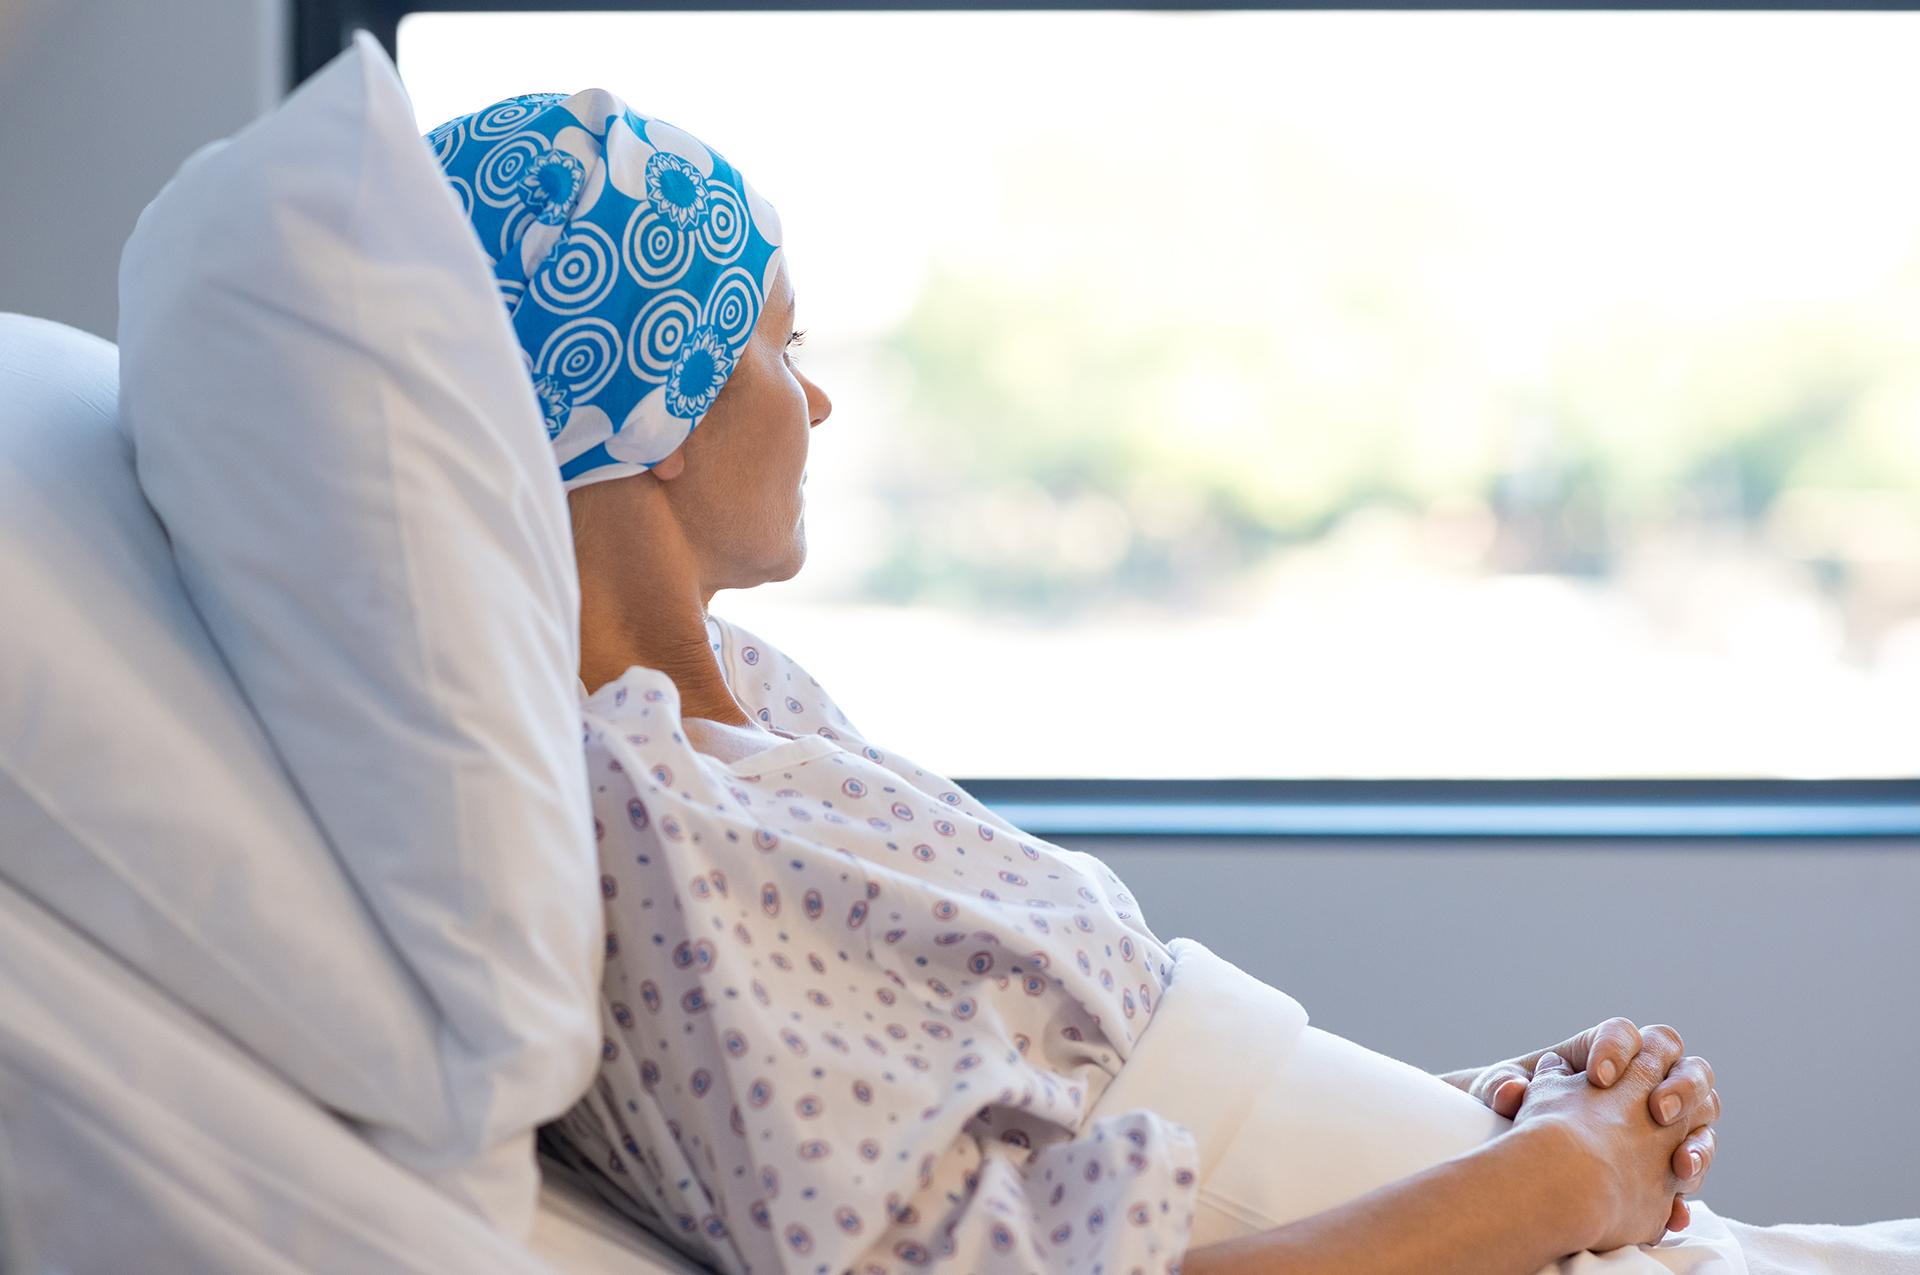 How to Deal with Chemo Side Effects? Important Tips to Follow